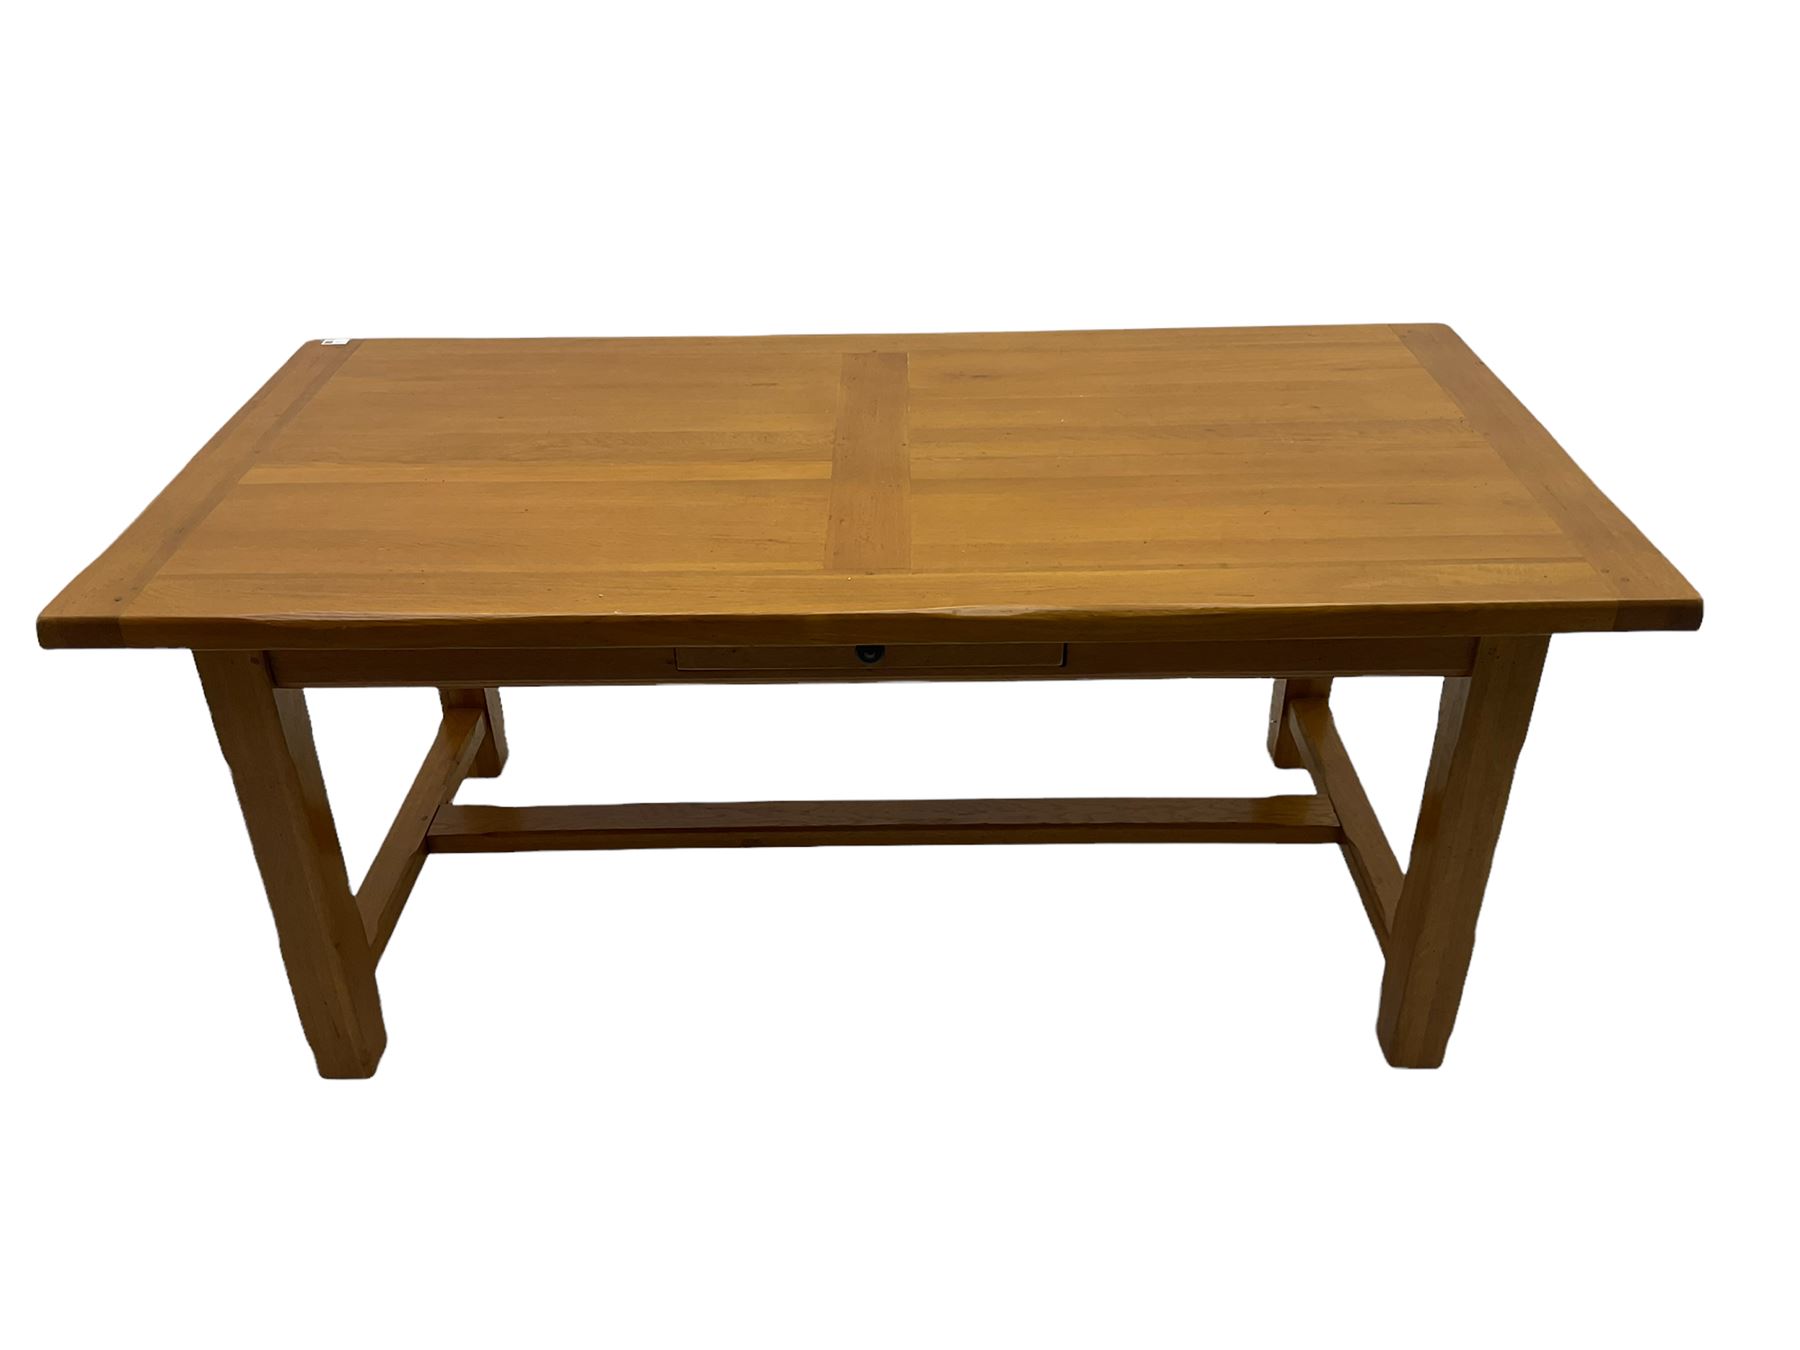 Light oak rectangular dining table with two additional leaves - Image 2 of 7